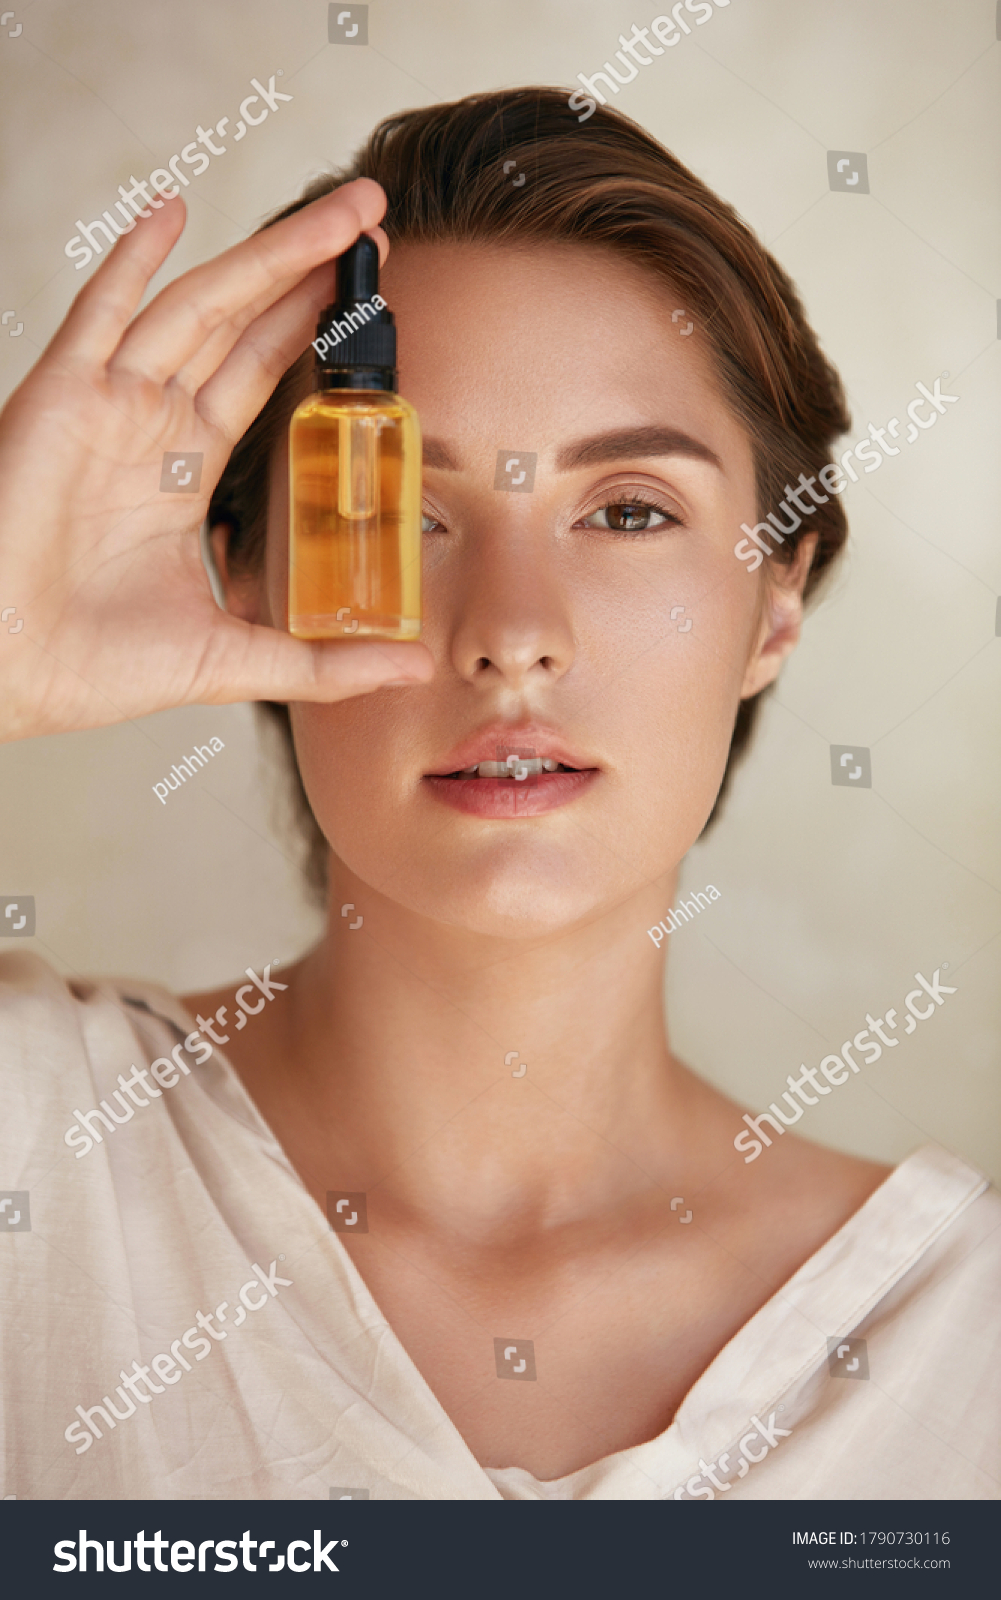 Skin Care. Beauty Portrait Of Woman Holding Bottle With Dropper Near Face. Model Using Natural Cosmetic Product For Hydrated, Glowing And Healthy Facial Derma. Essential Oil For Anti-Aging Therapy. #1790730116